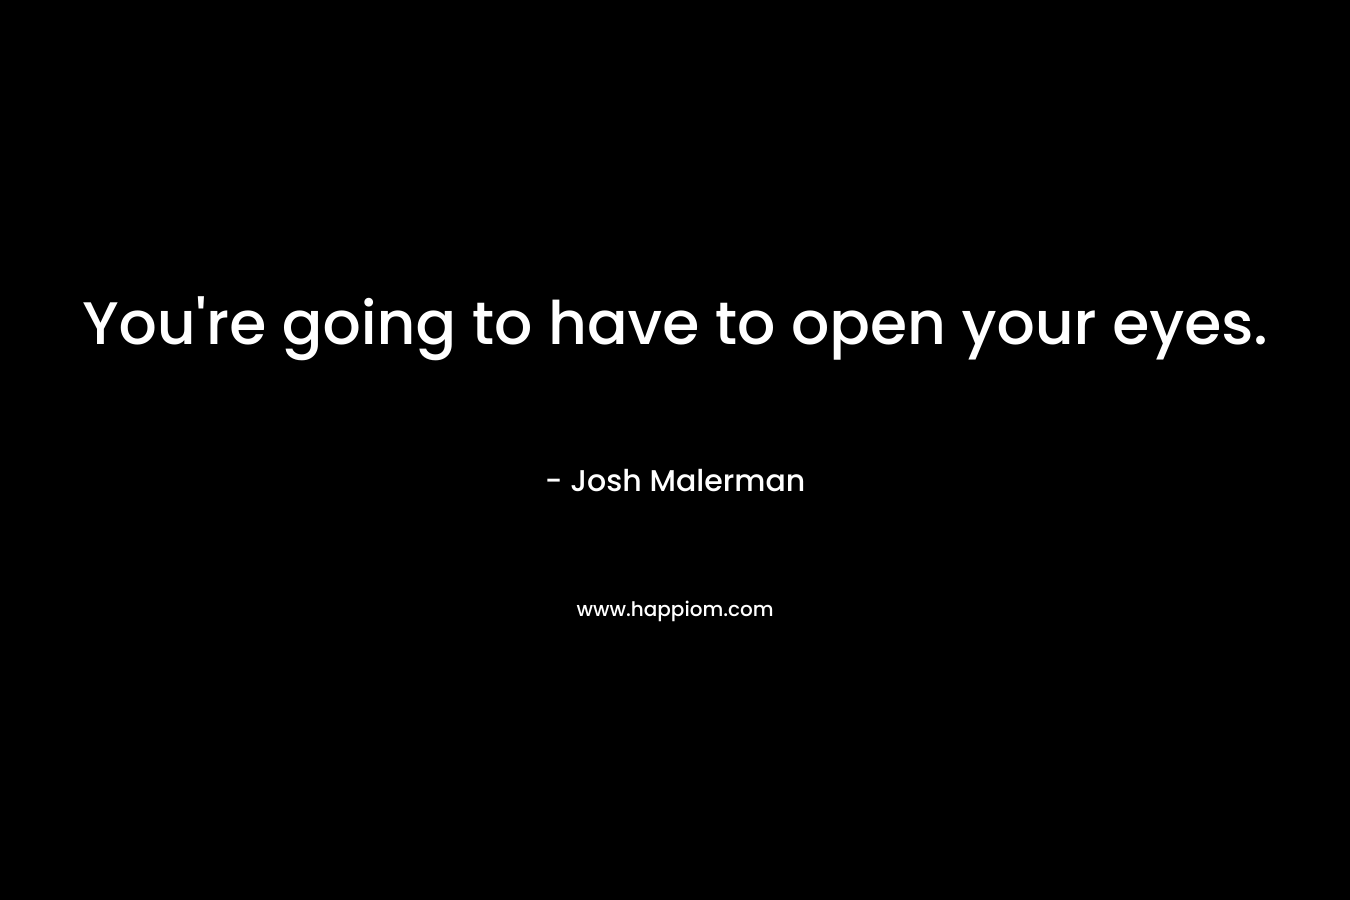 You’re going to have to open your eyes. – Josh Malerman